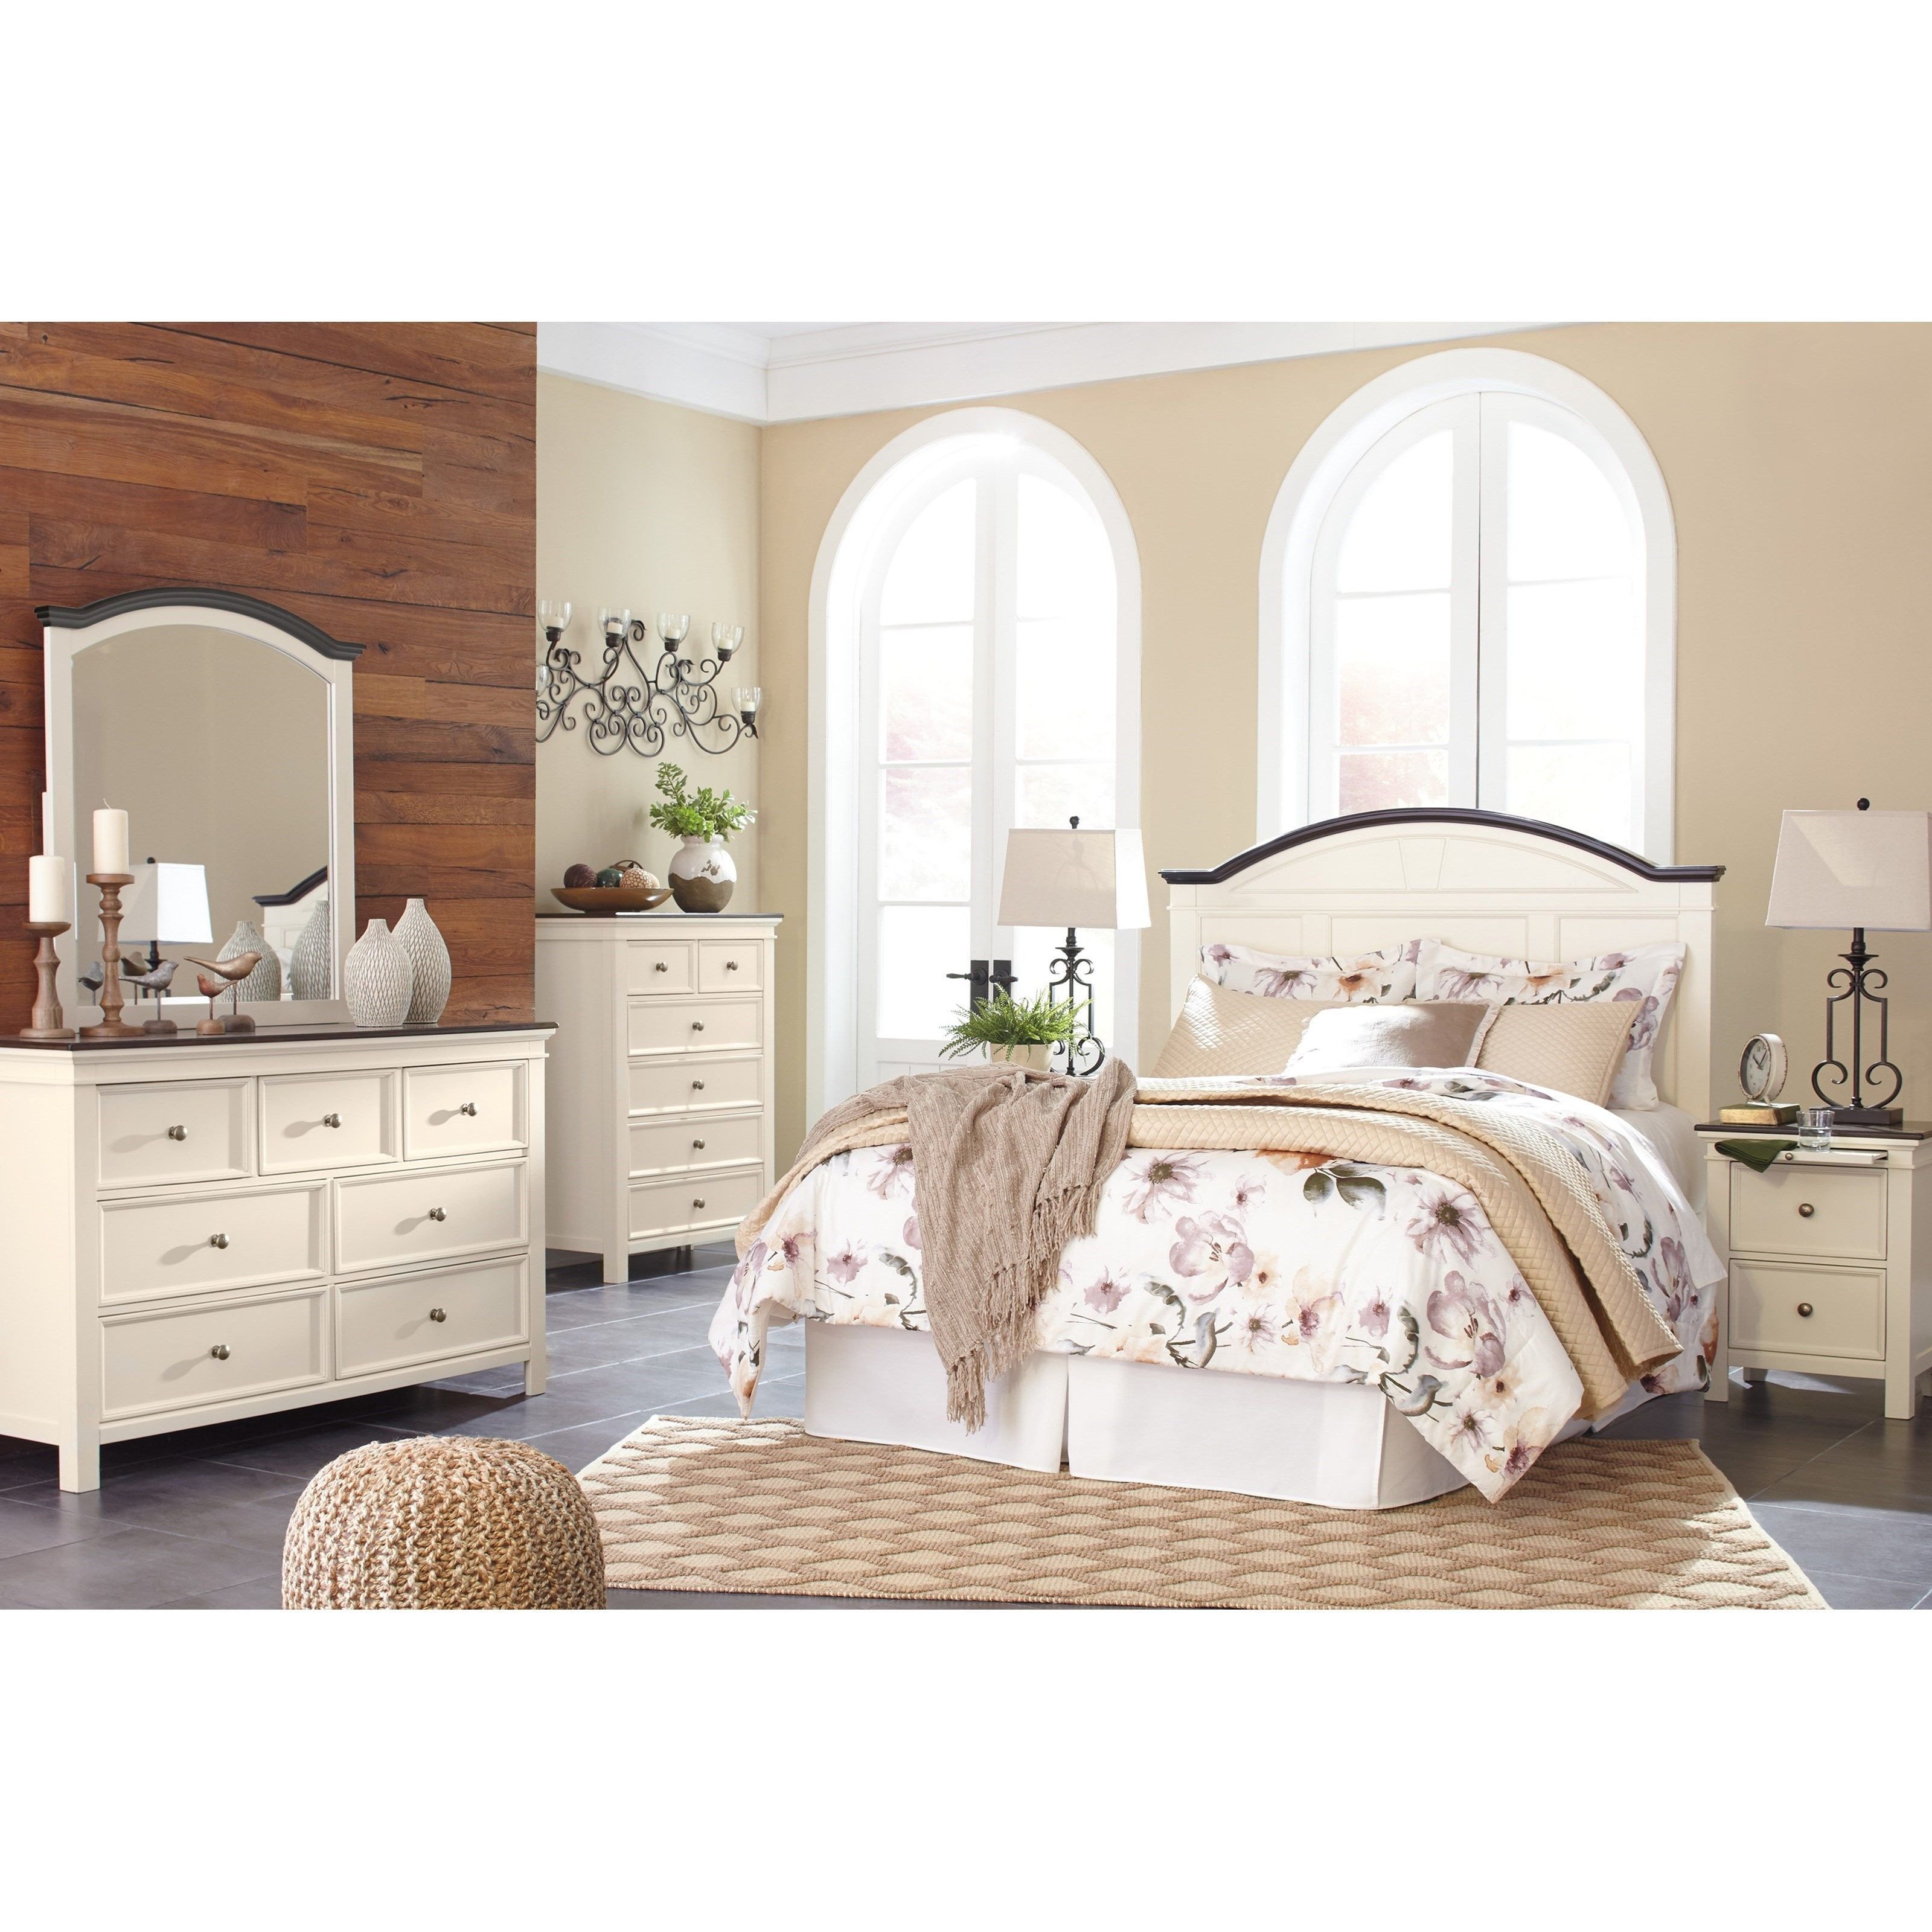 Ashley White Bedroom Furniture Elegant Woodanville Queen Bedroom Group by Signature Design by